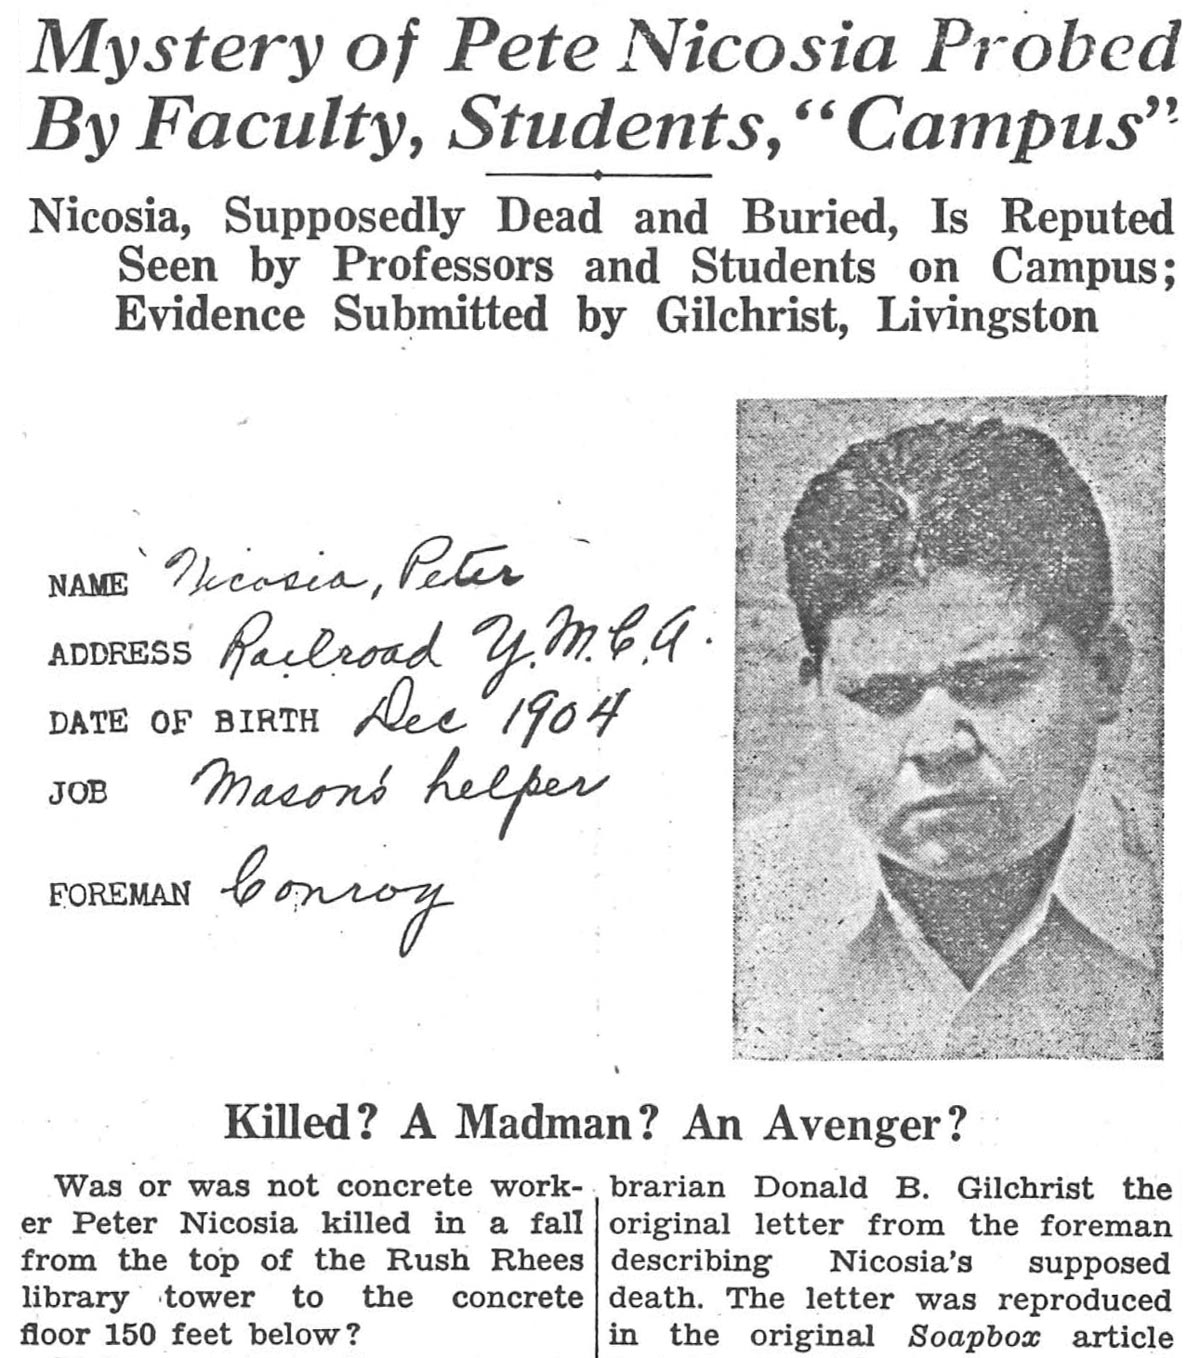 reproduction of Campus Times front page story on campus ghost from 1934